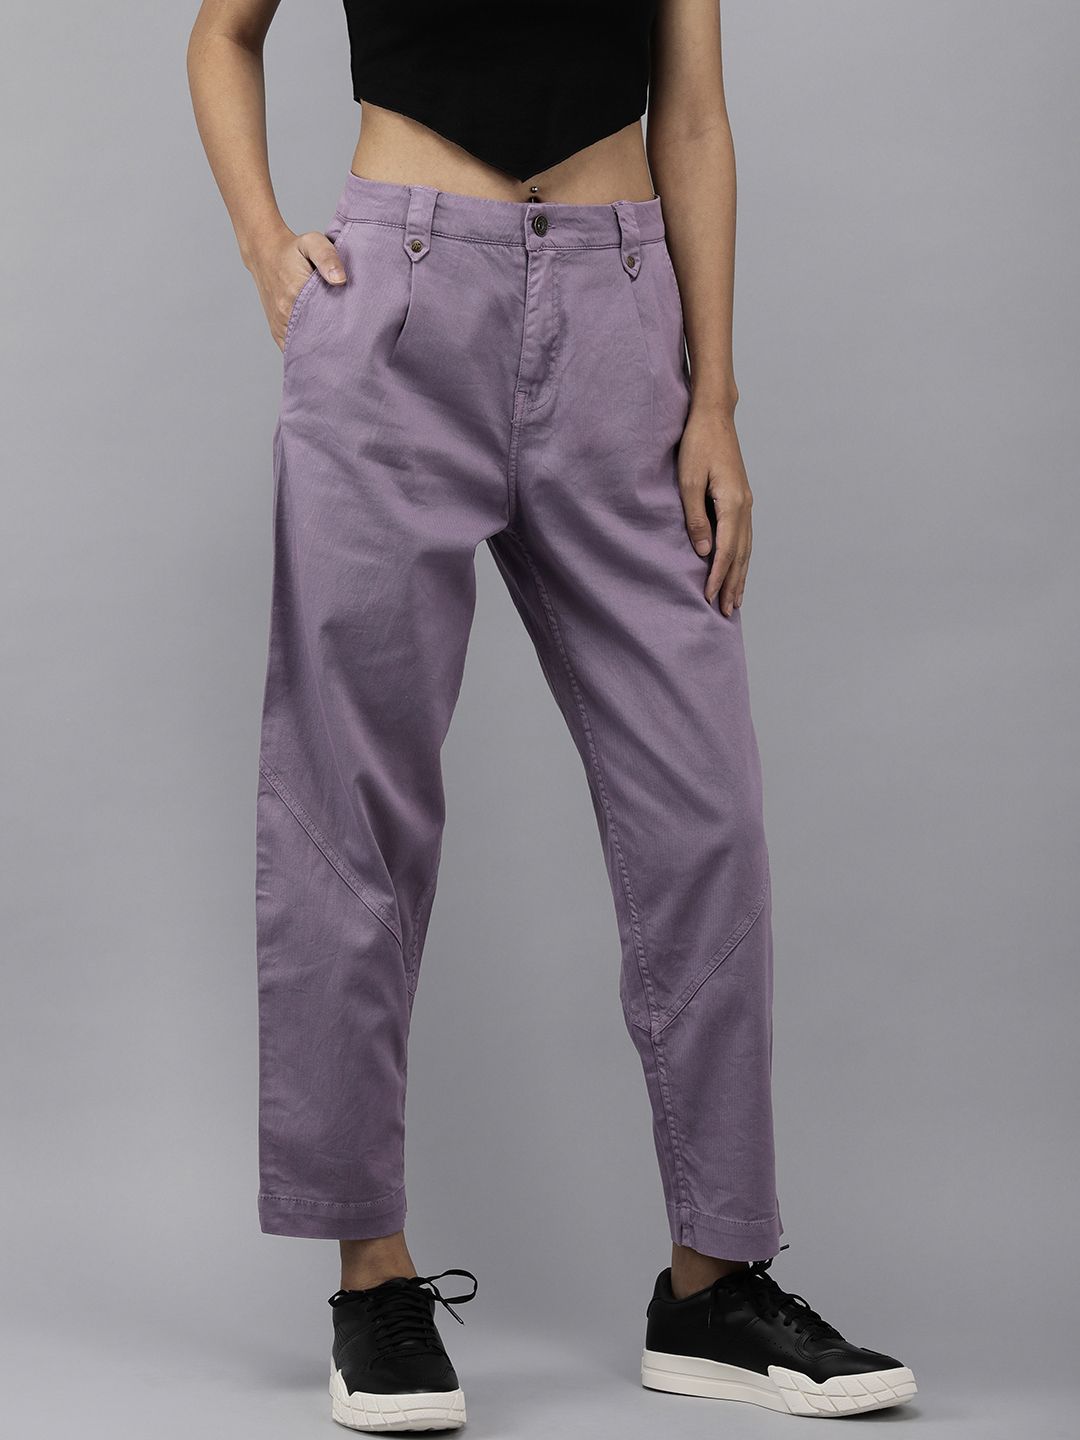 The Roadster Lifestyle Co Women Purple Solid Trousers Price in India